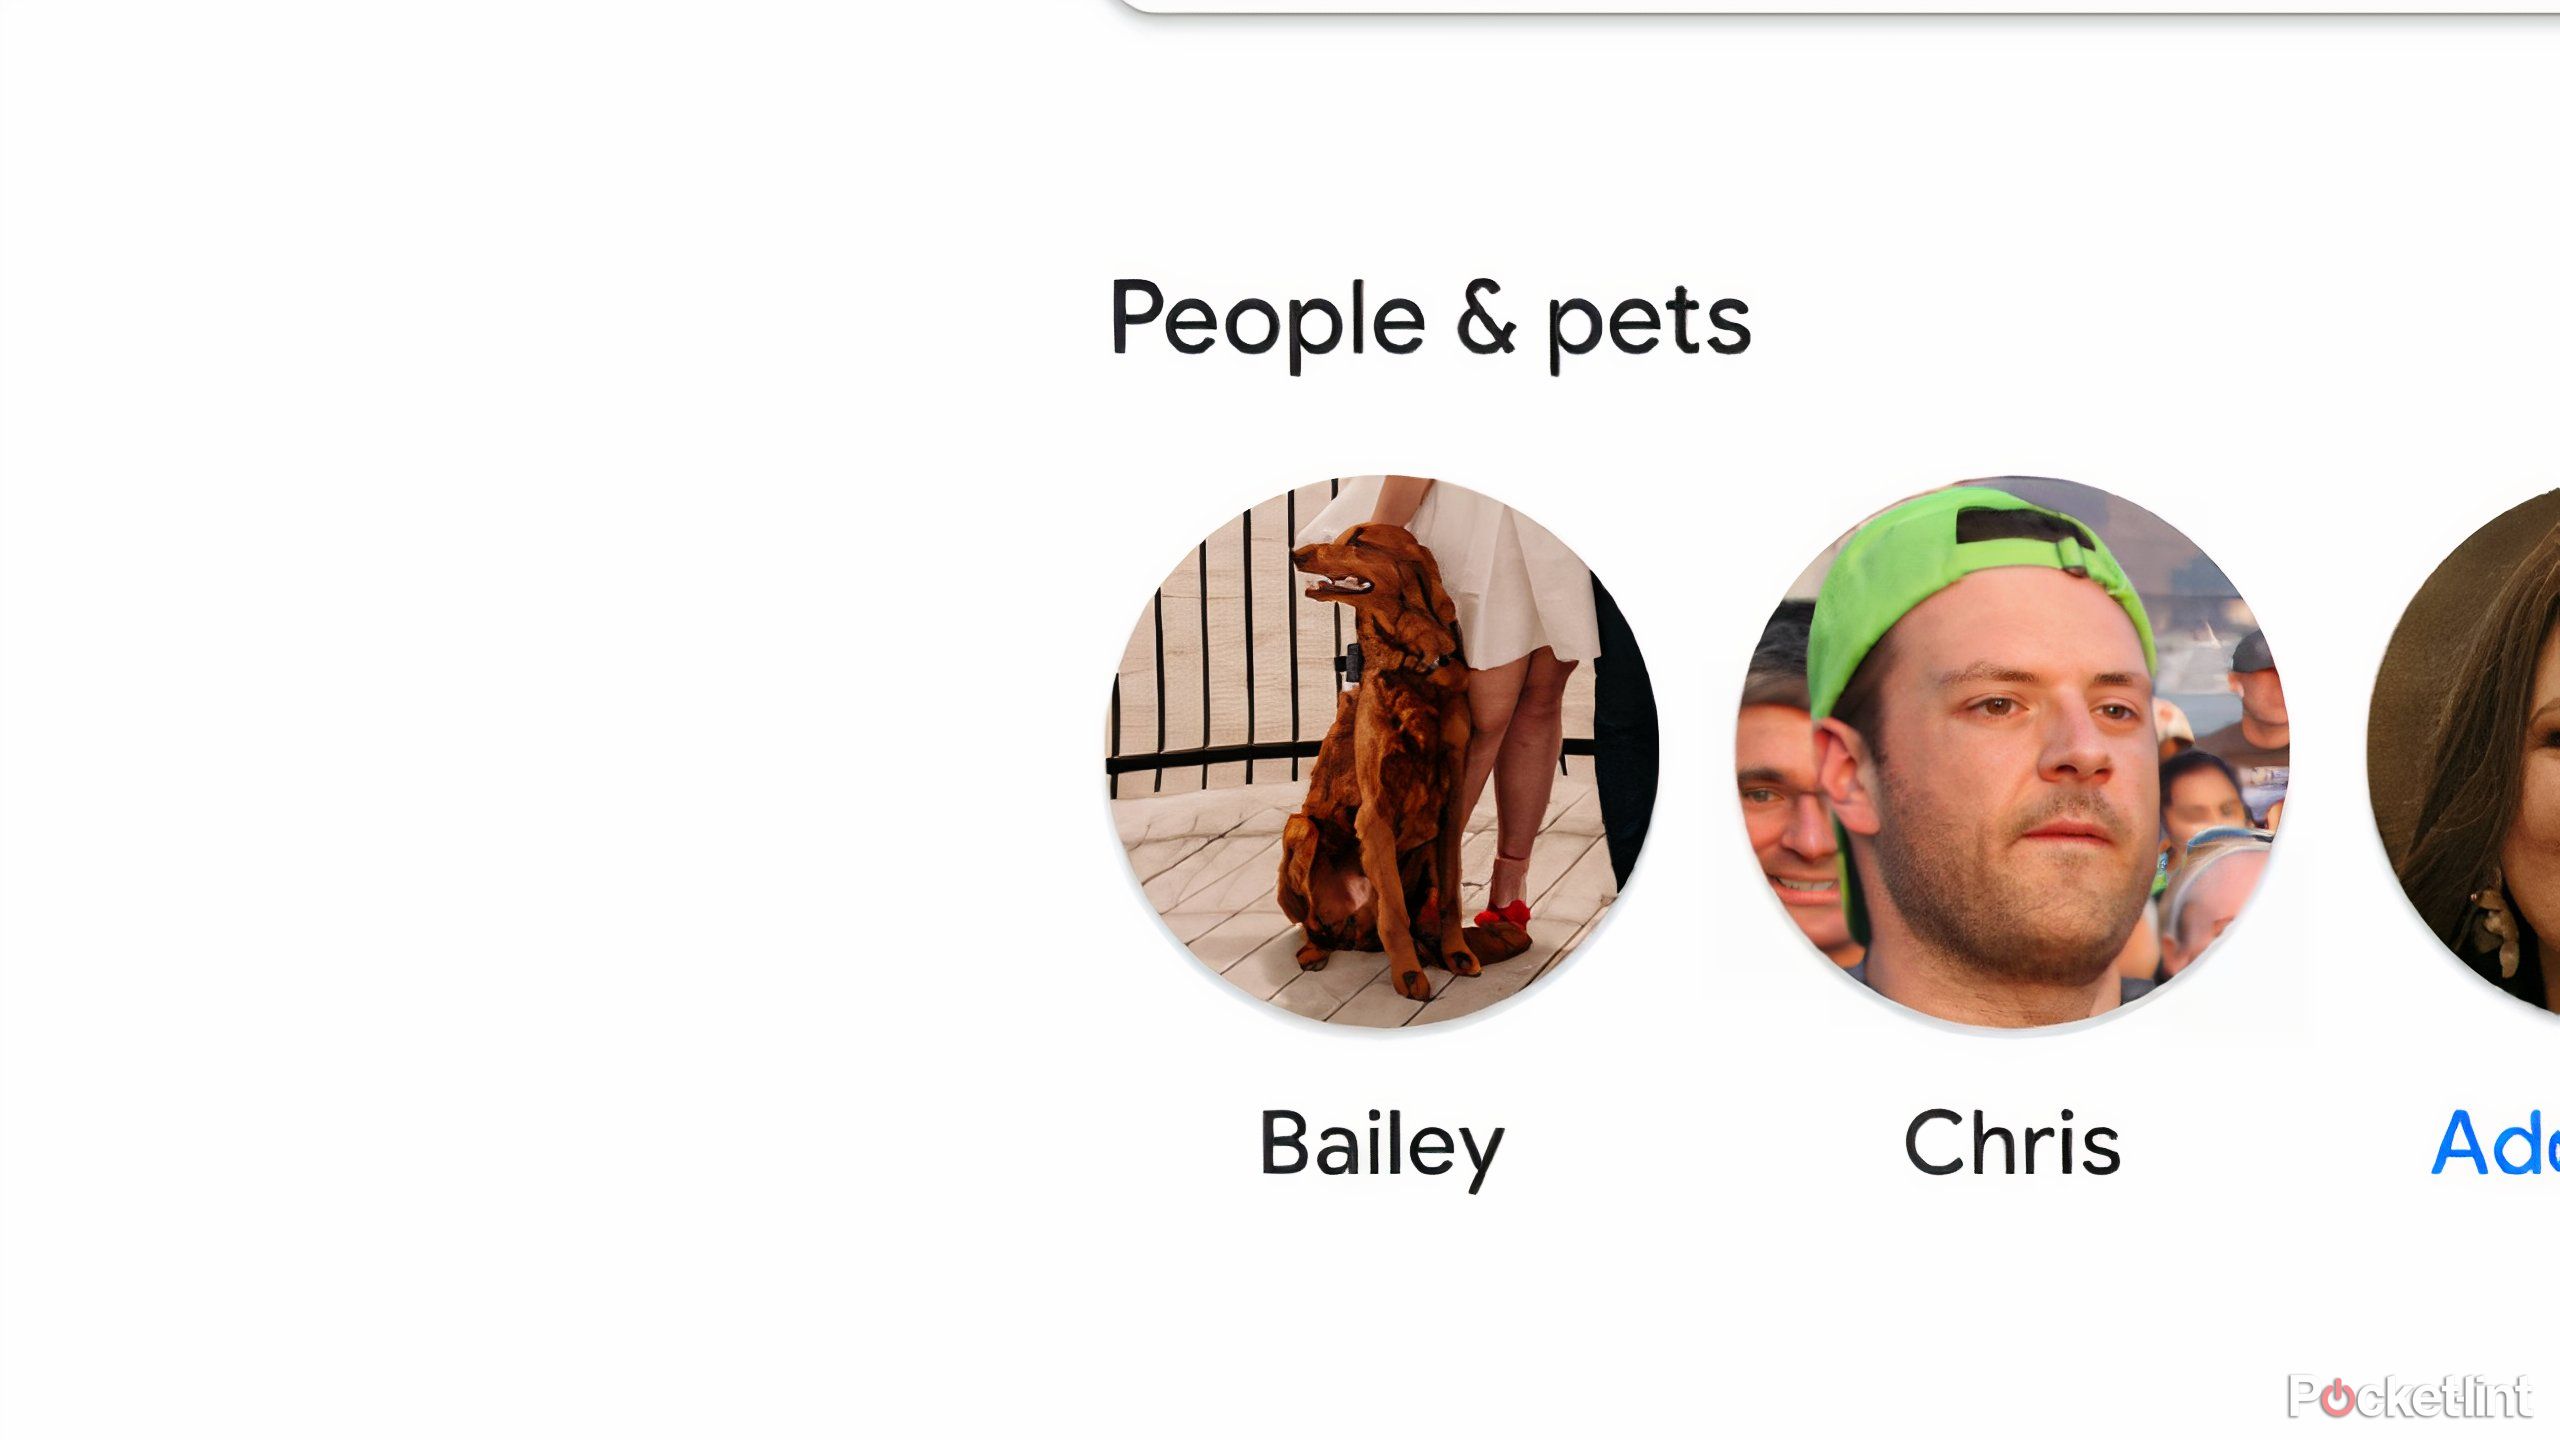 sort by person feature in Google Photos